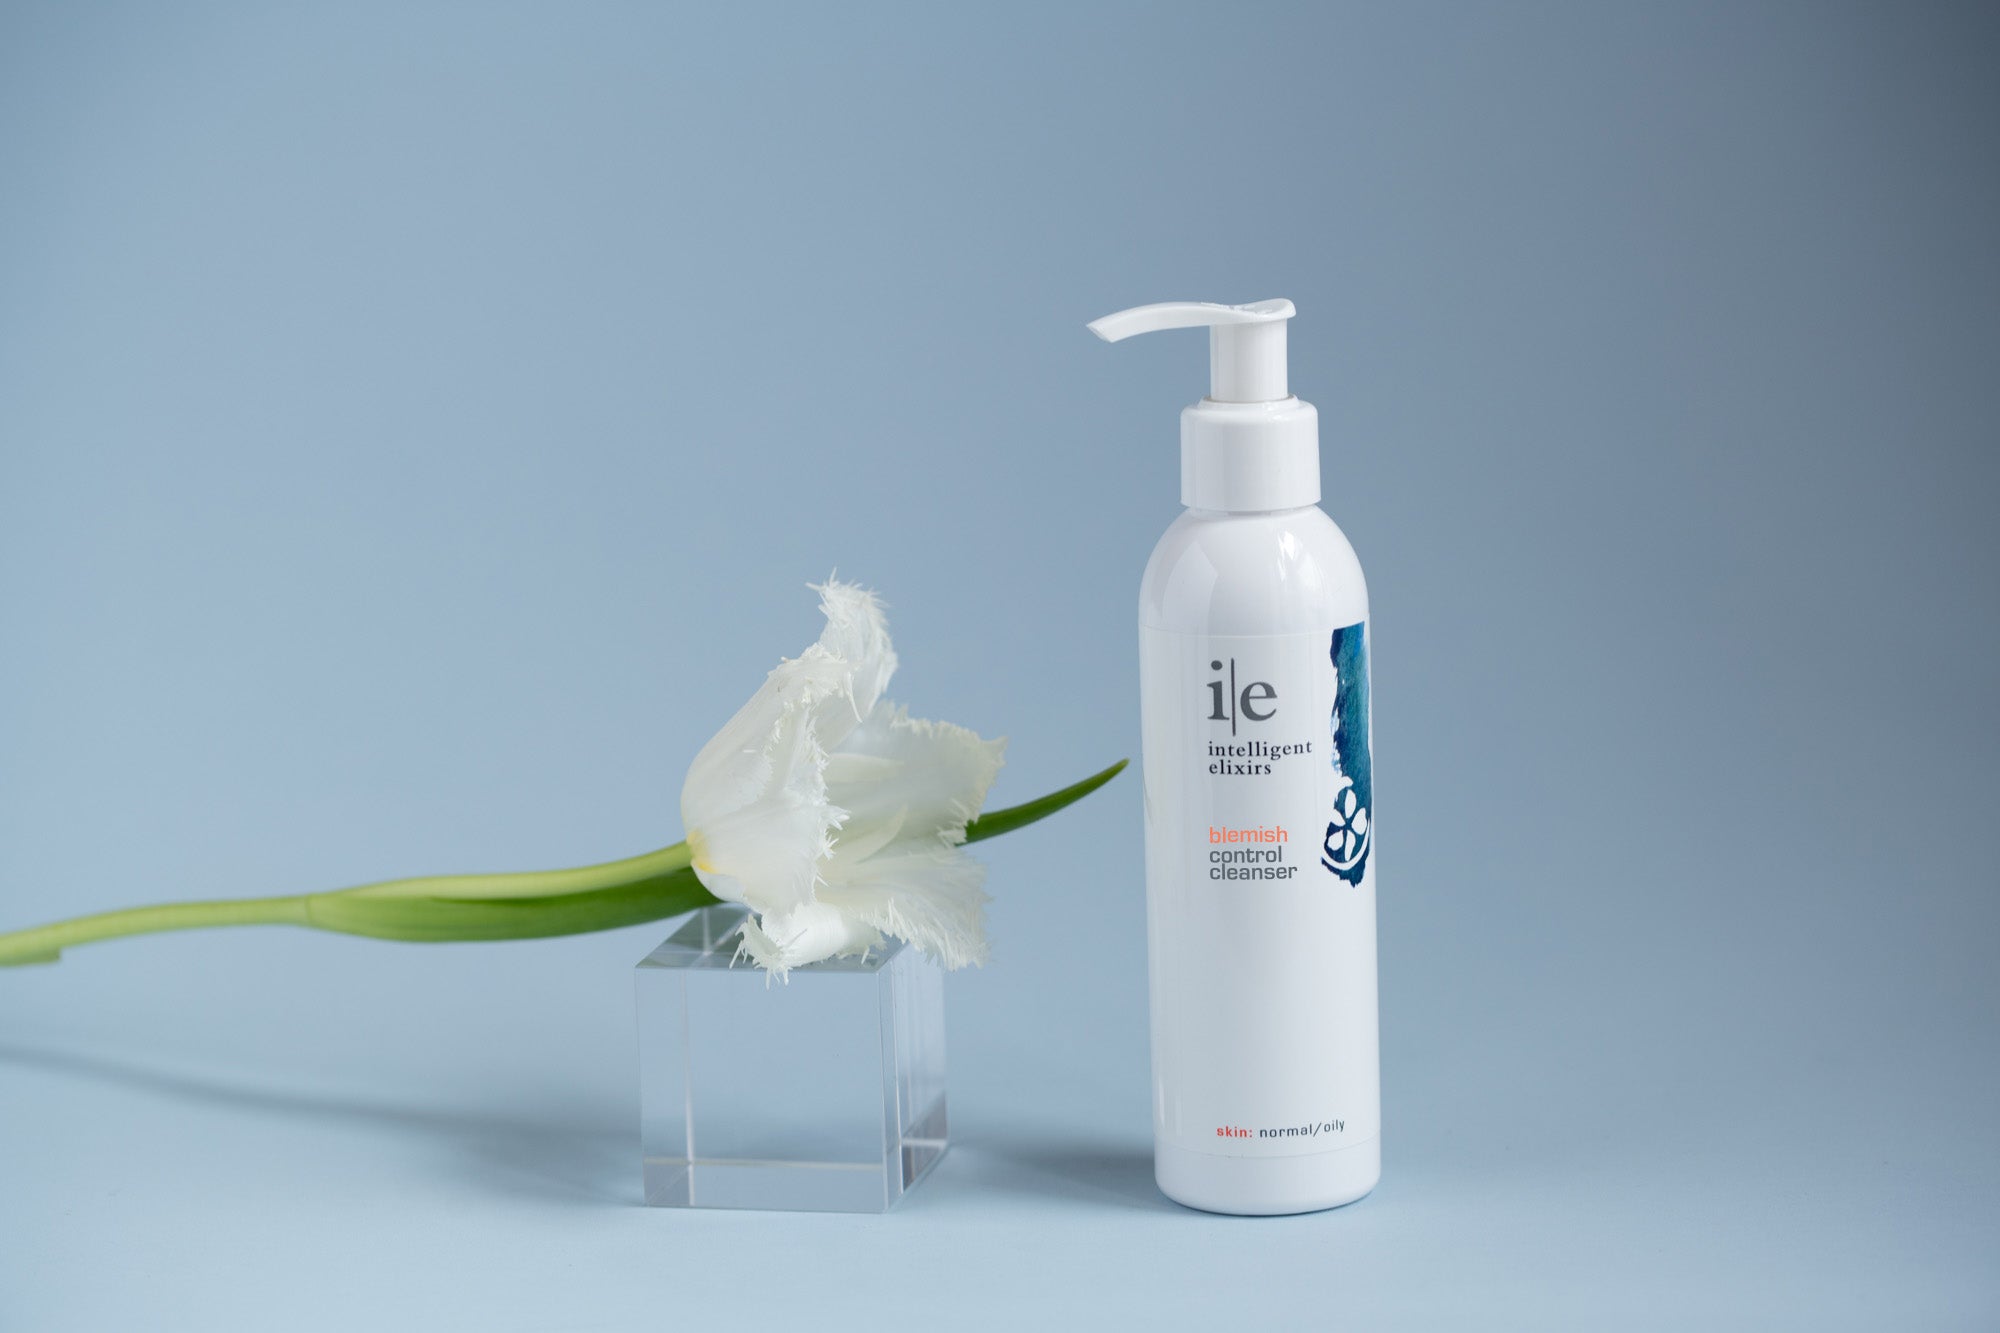 Blemish Control Cleanser for blemish-prone or oily skin next to a flower